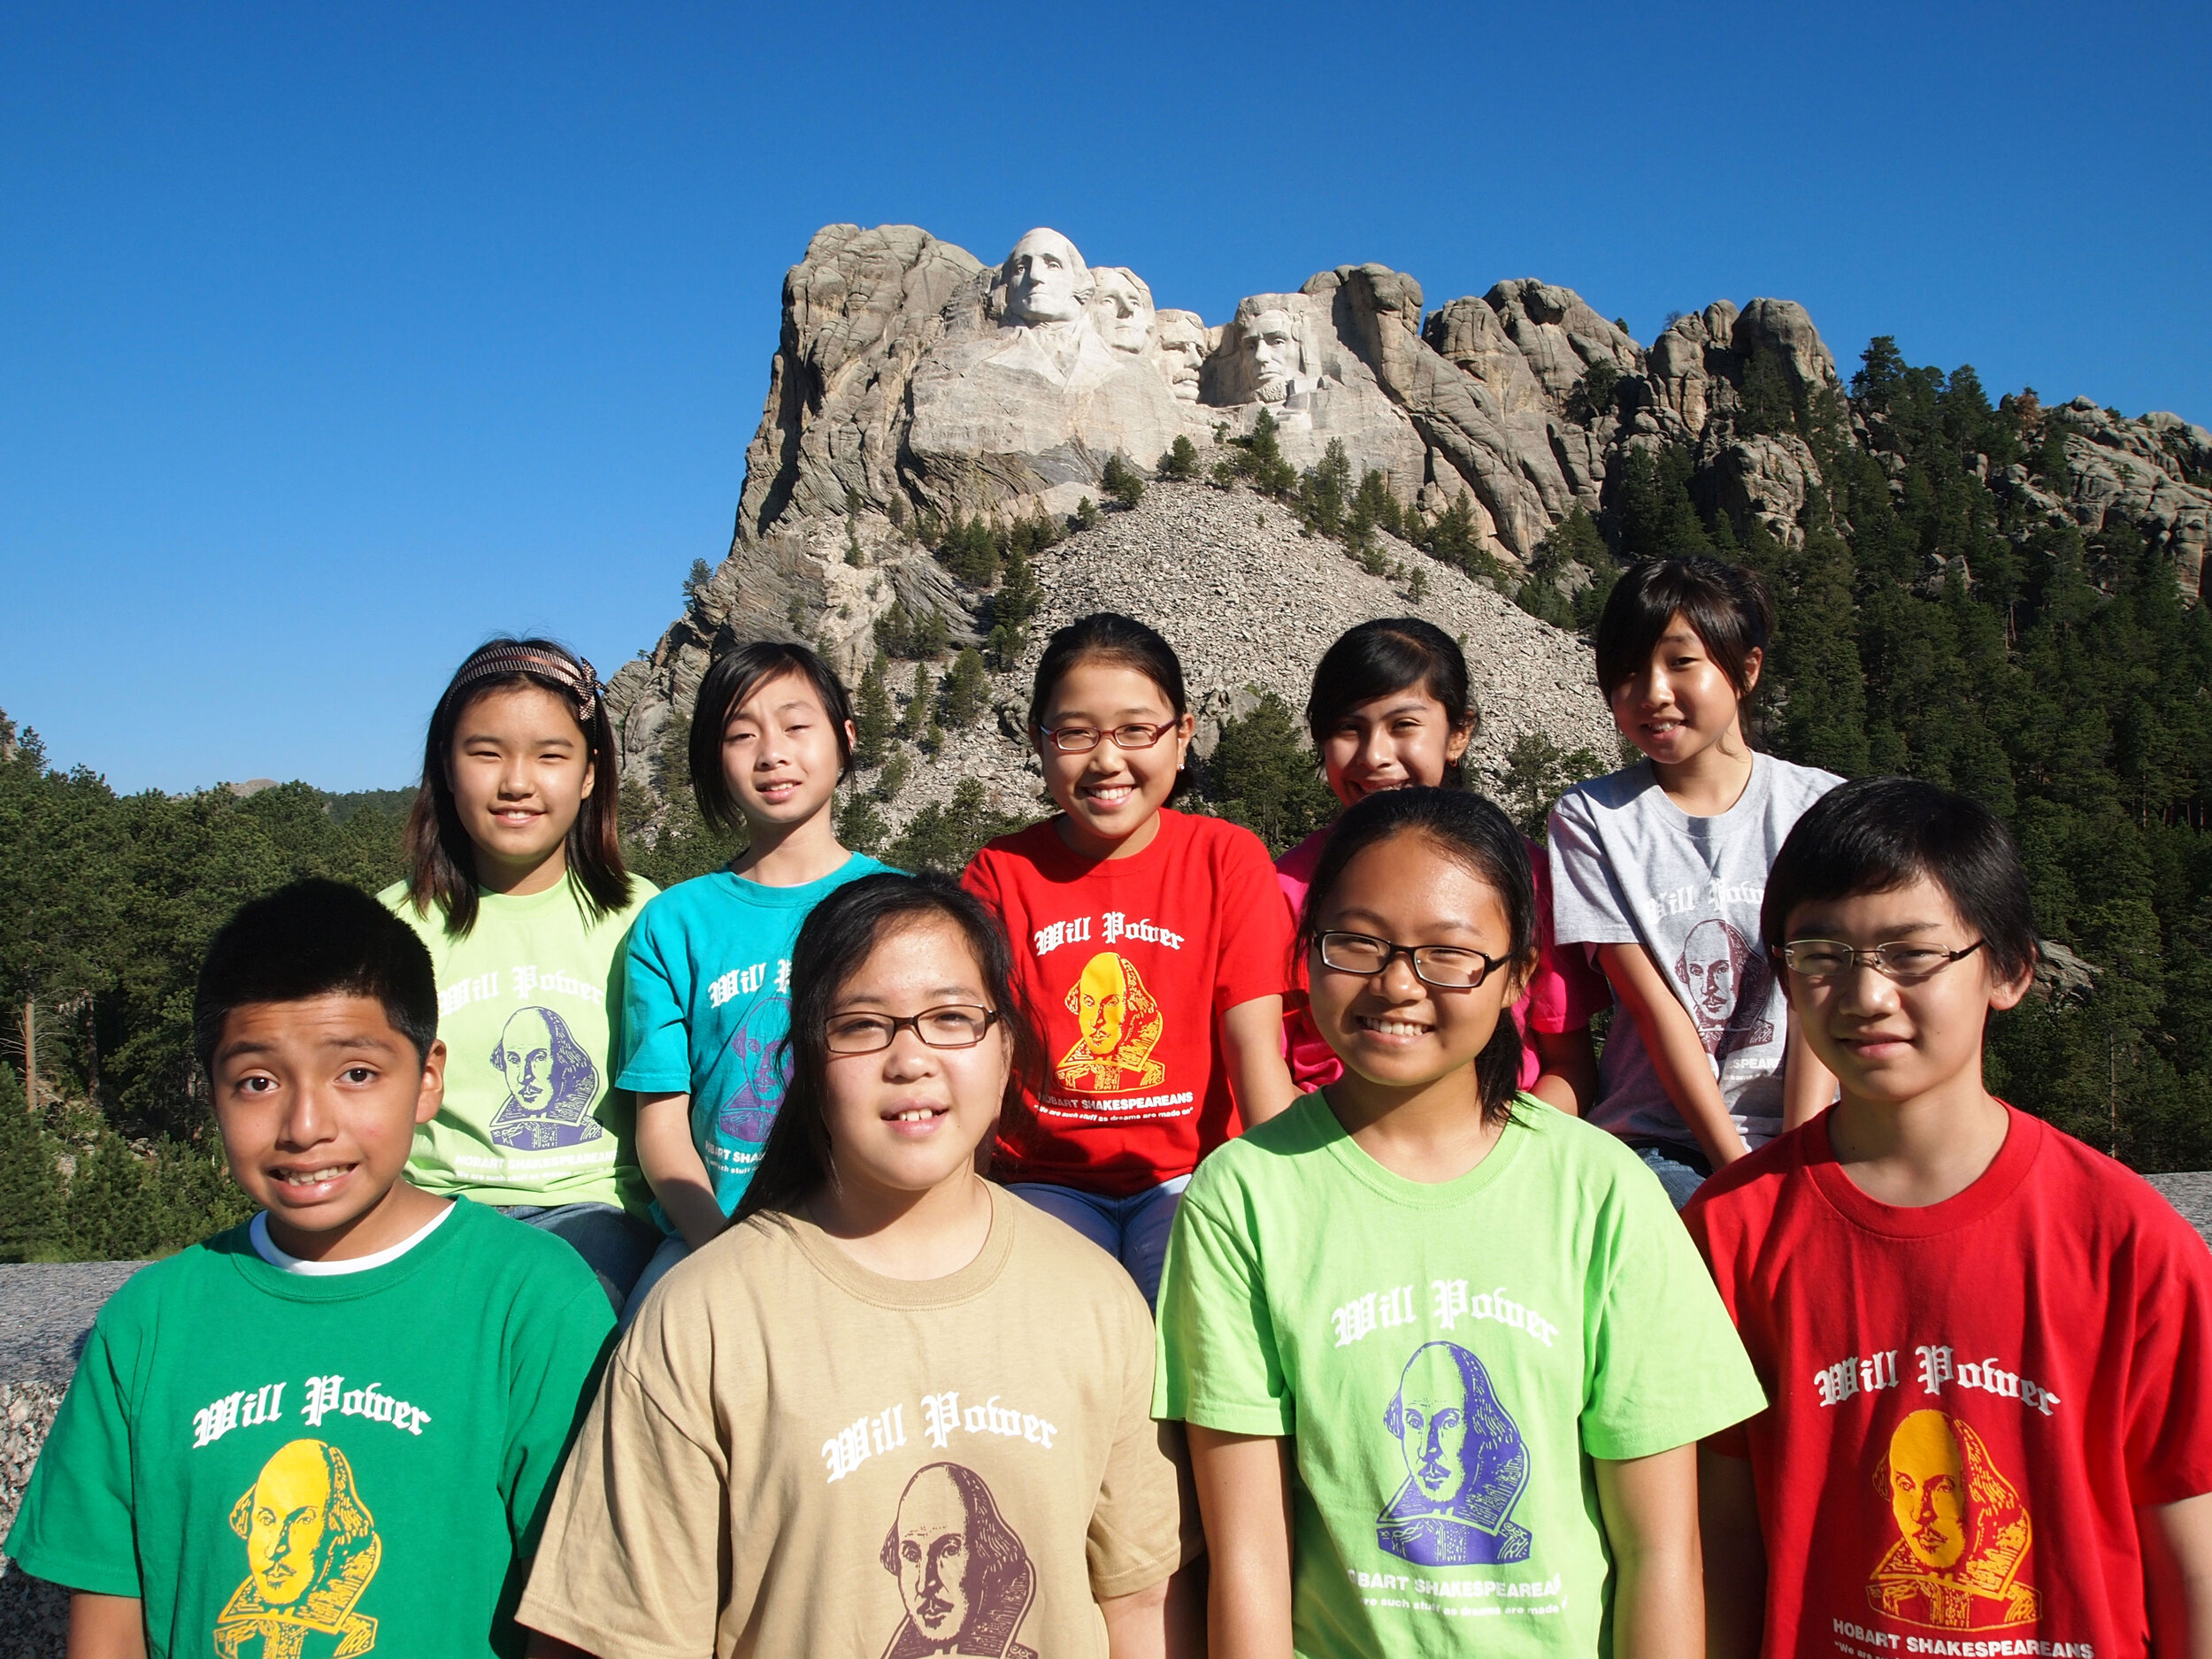  A Glorious Morning at Mount Rushmore 